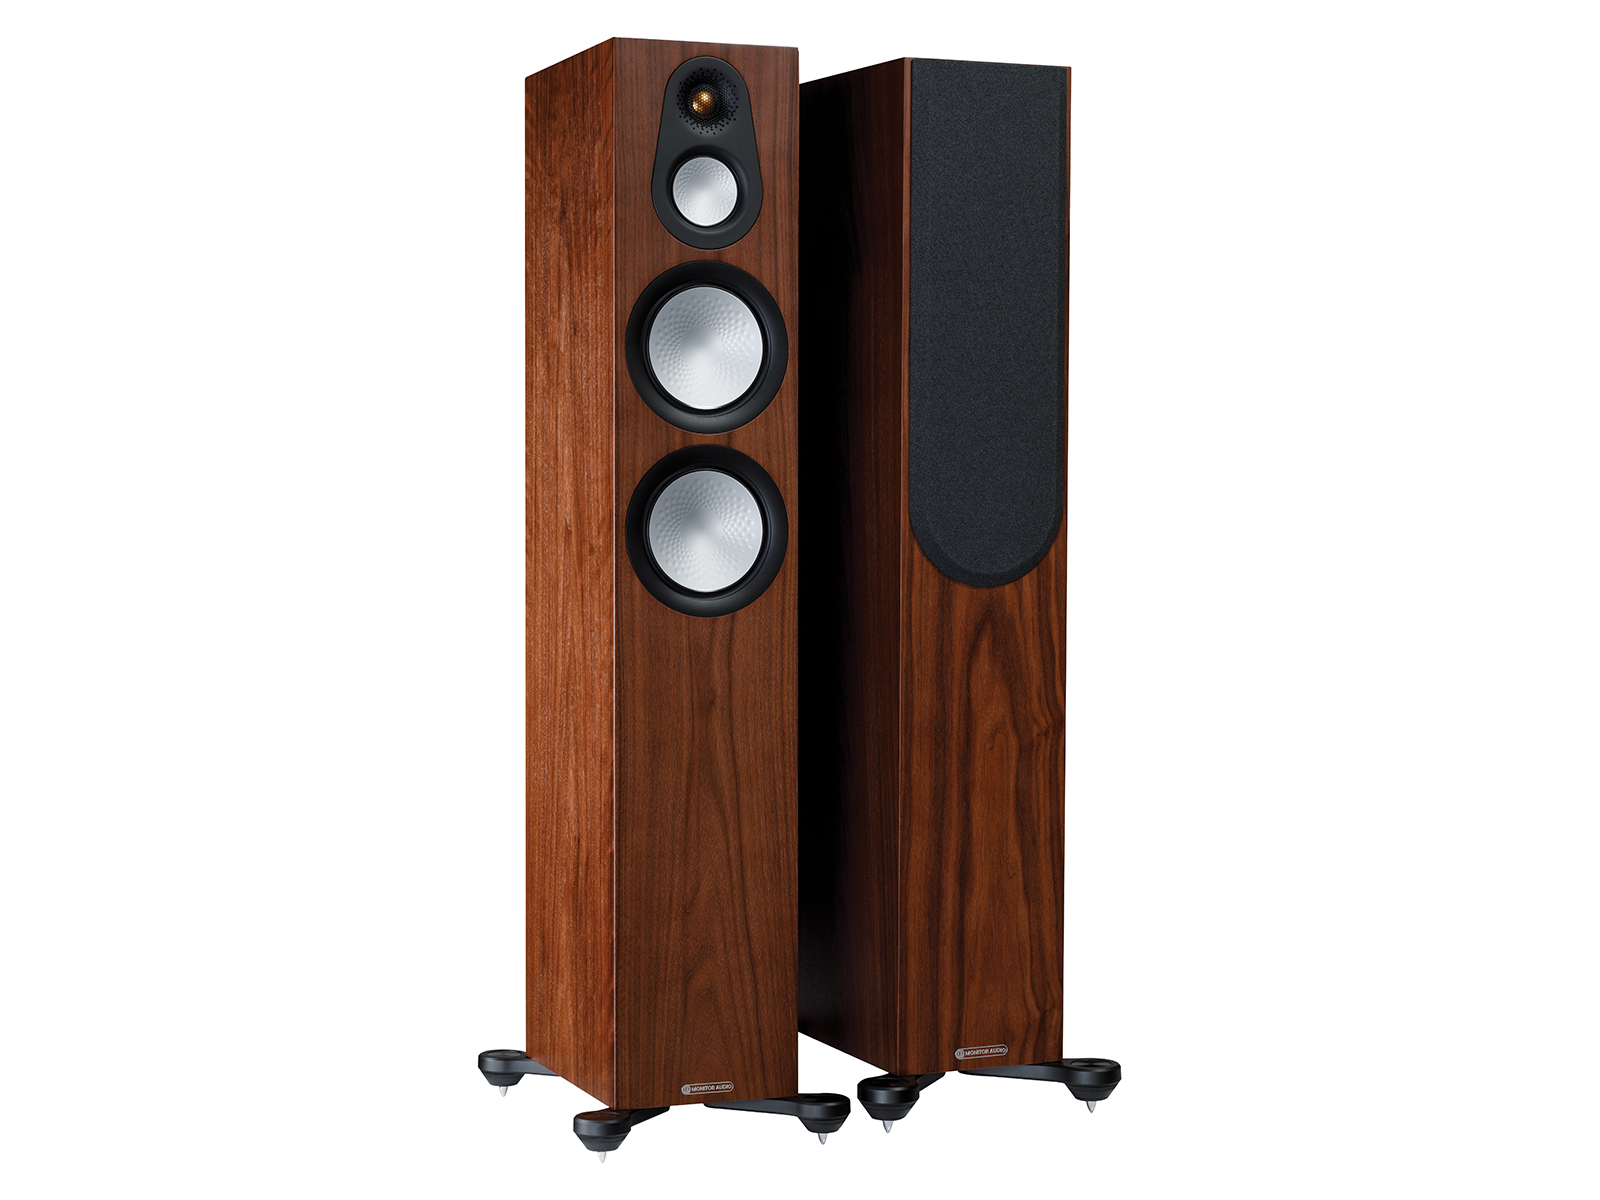 A pair of Monitor Audio's Silver 300 7G, in a natural walnut finish, iso view, with and without grilles.